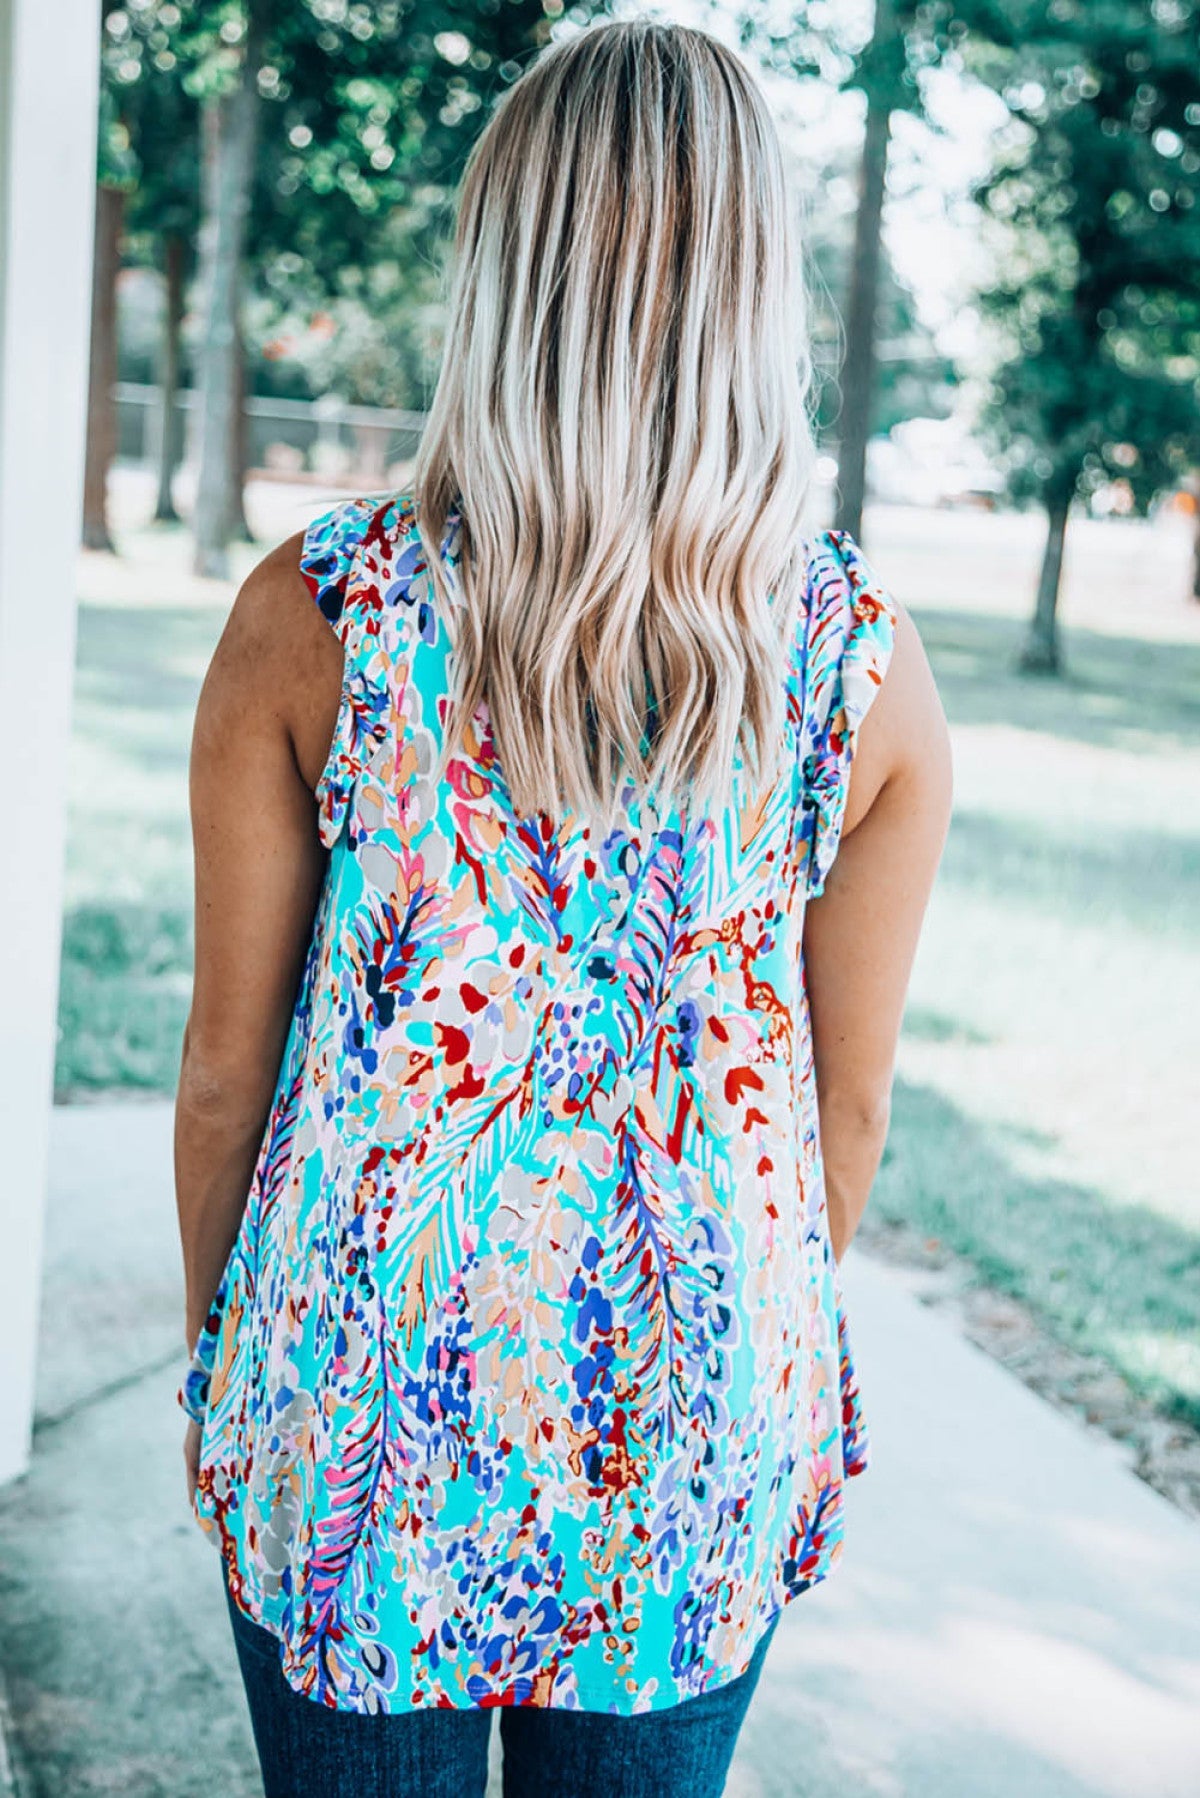 Floral Print Tank Top With Ruffles